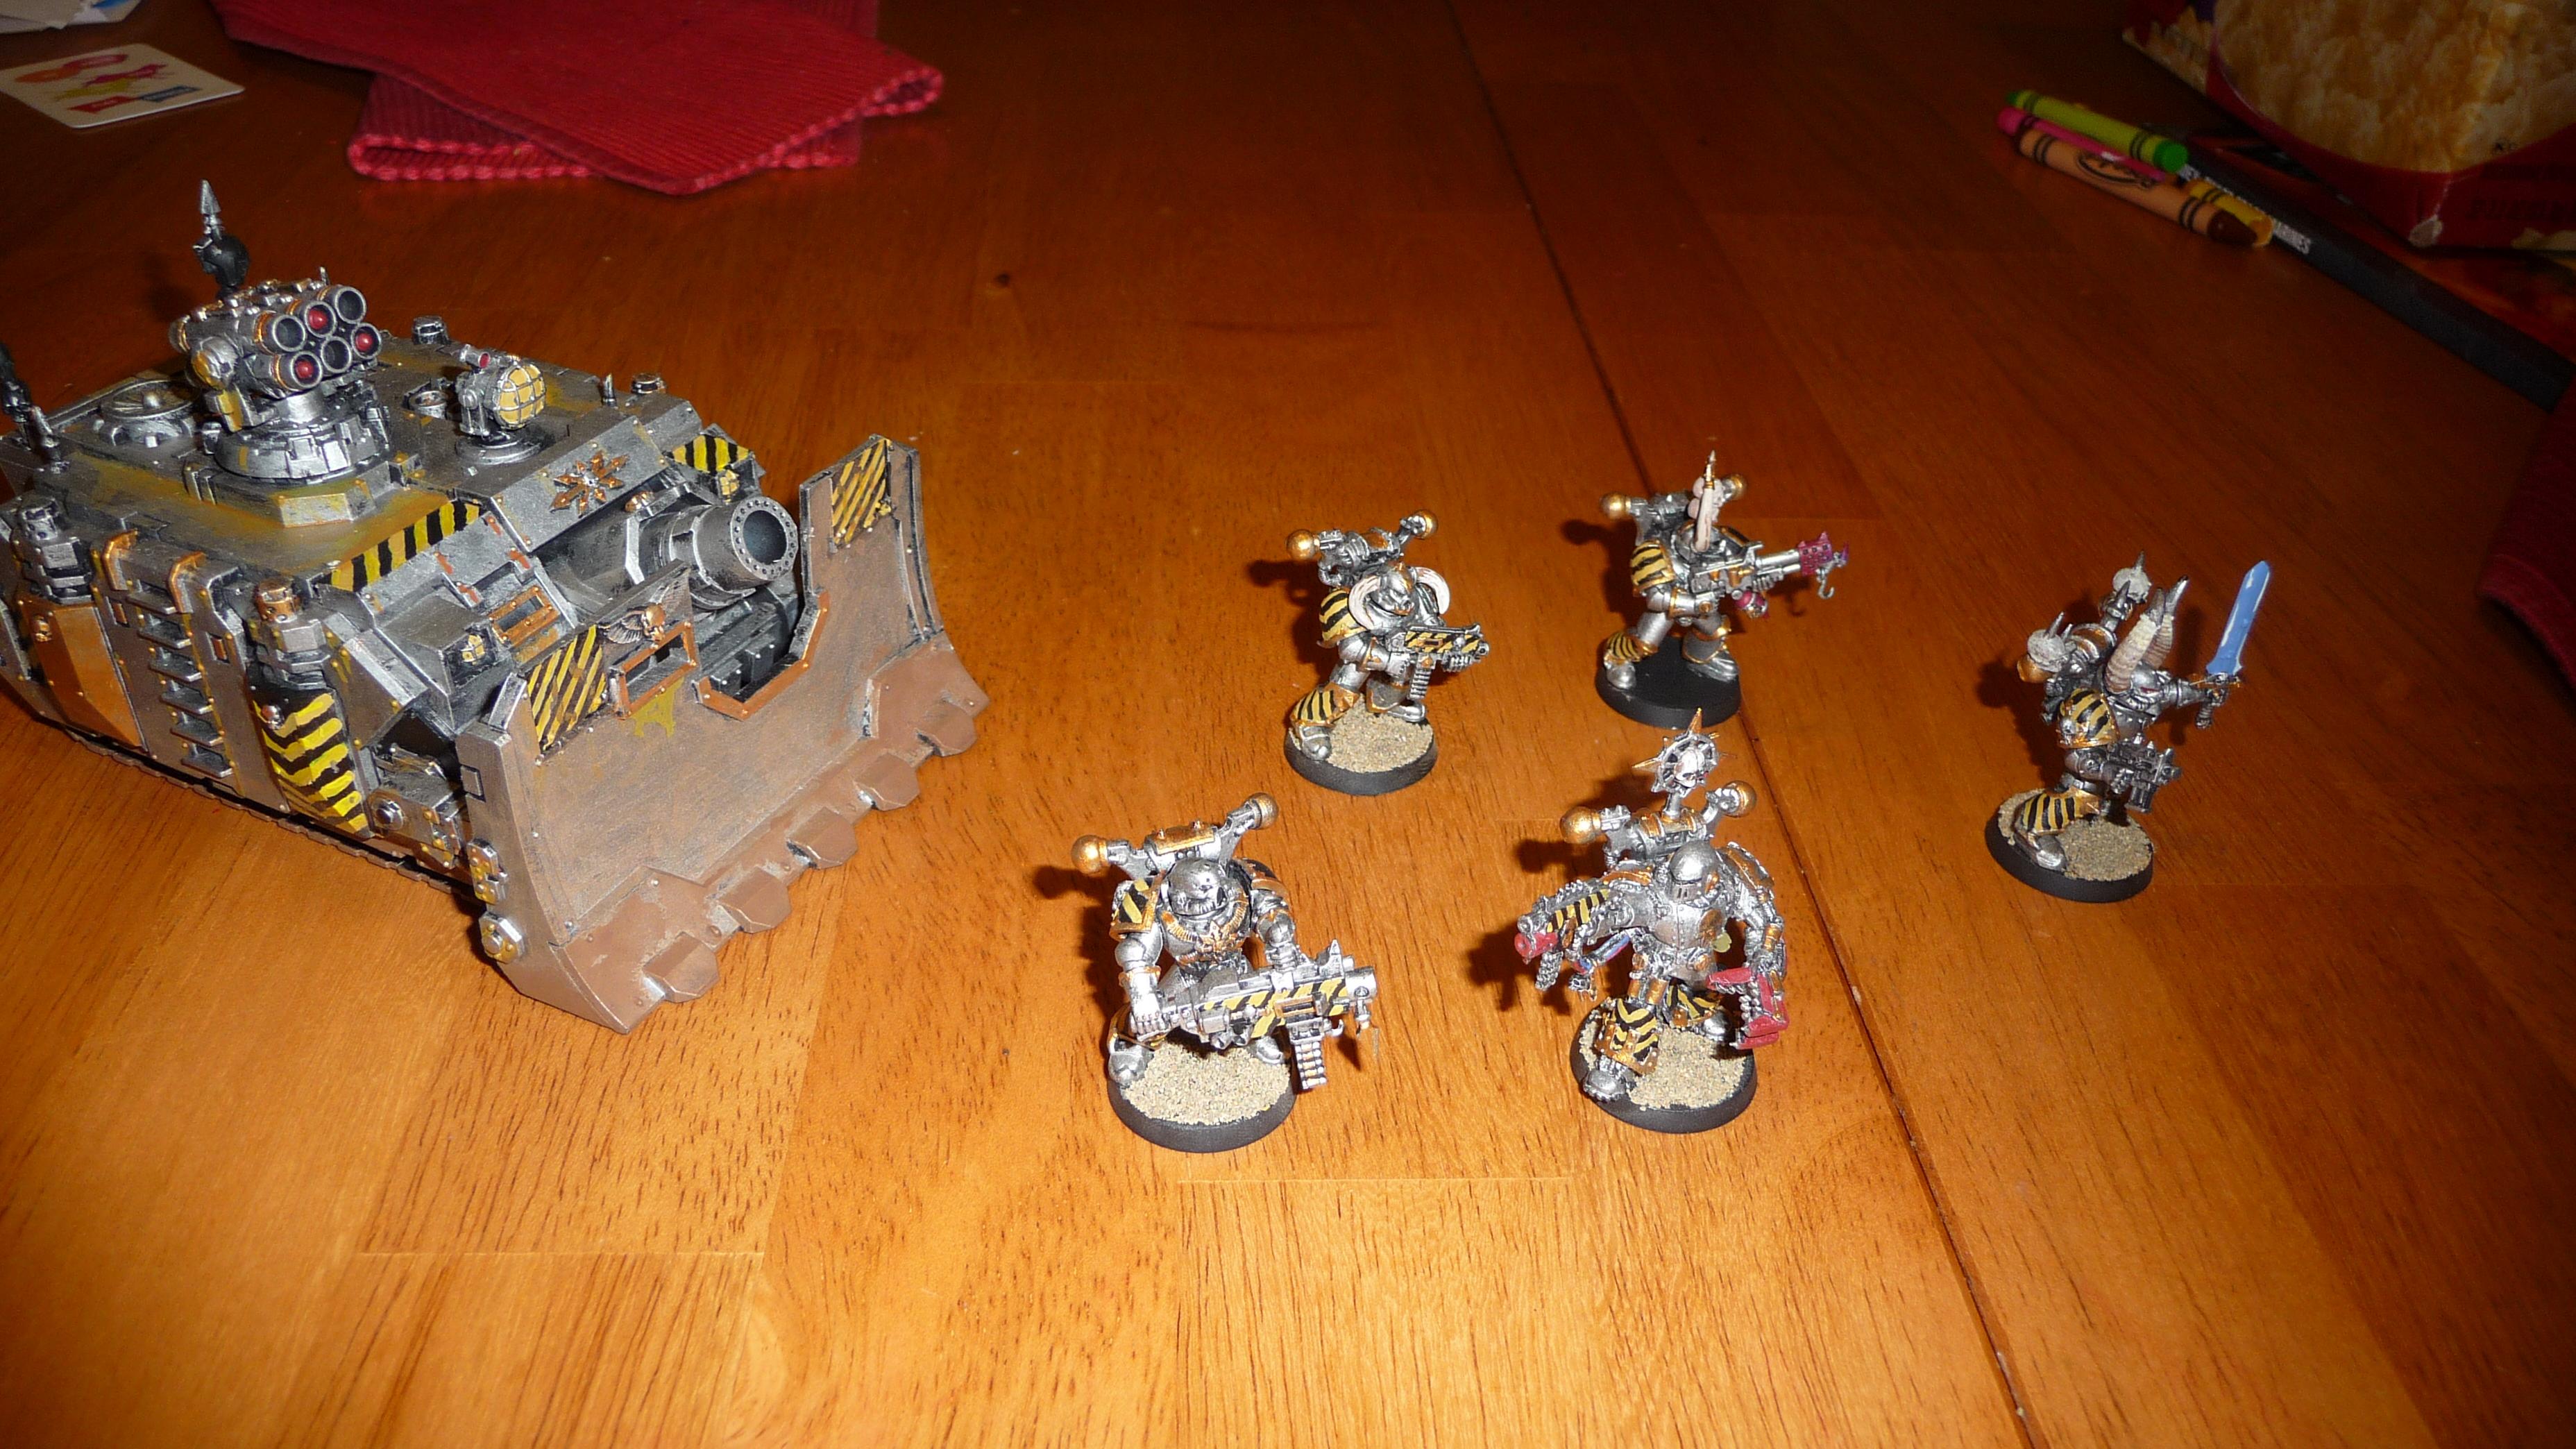 My Vindi and the others that are done so far, including Warsmith